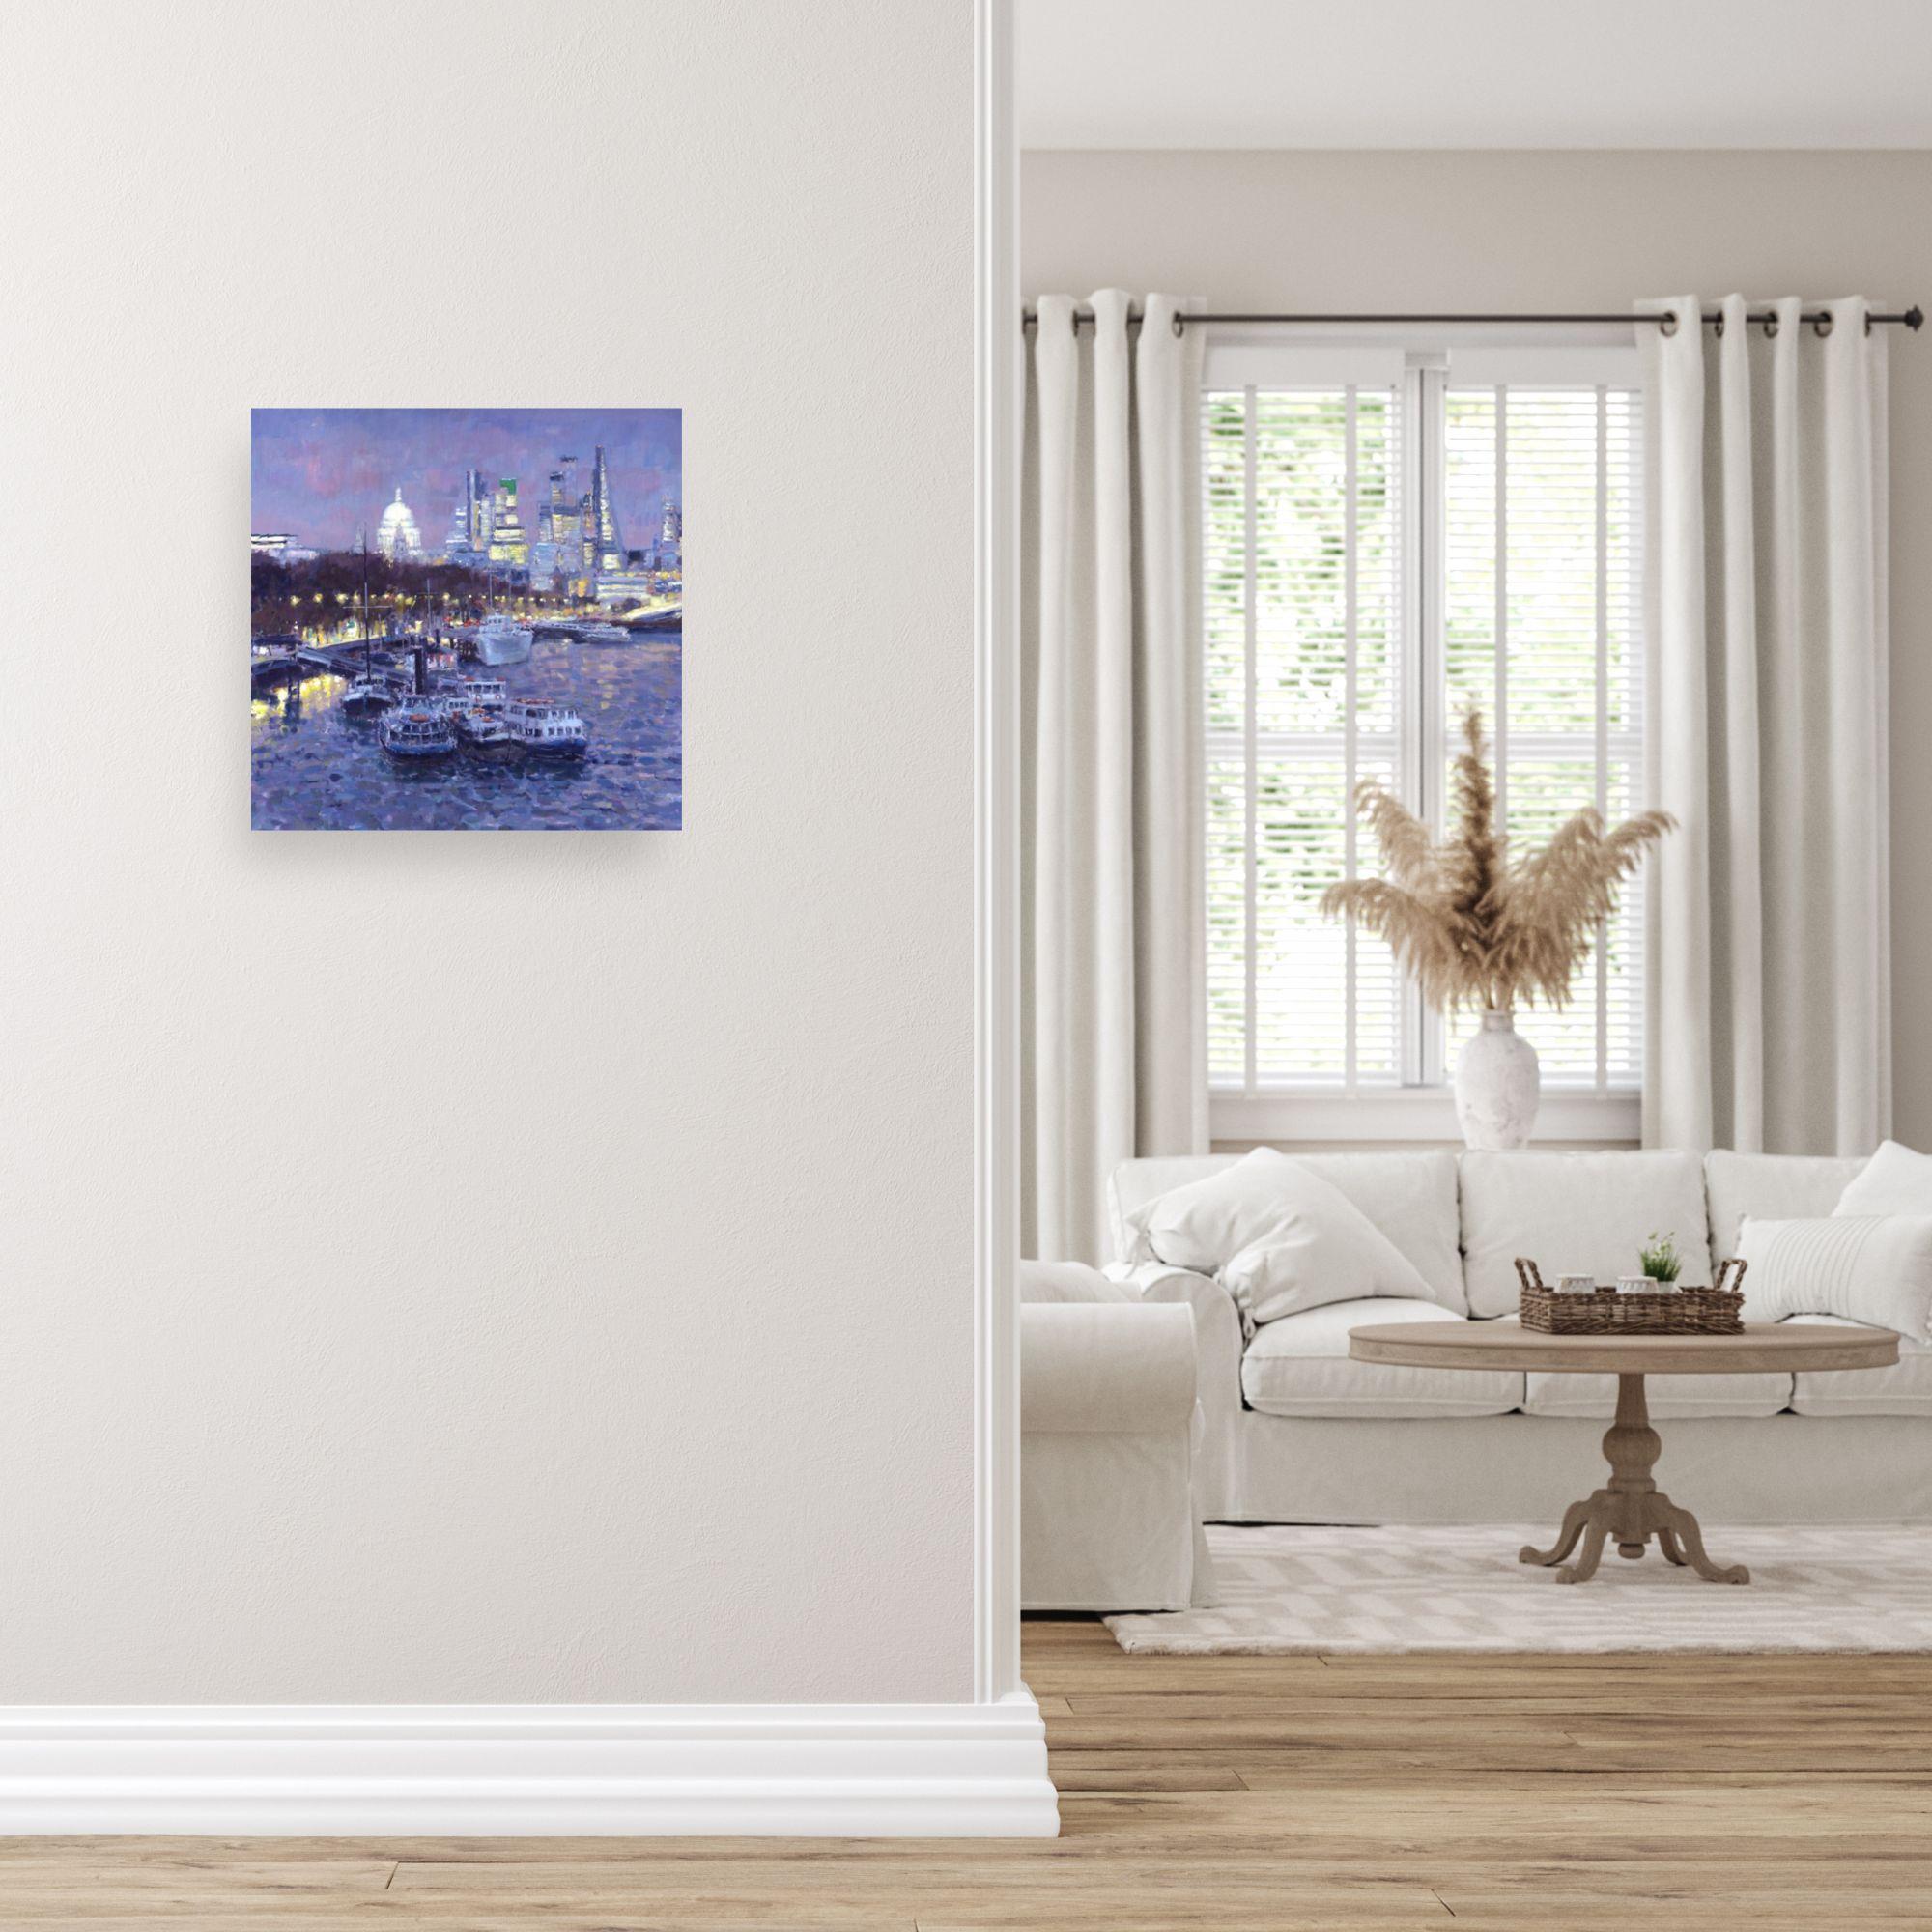 River Thames at Dusk-original impressionism London painting-contemporary Art - Painting by David Farren